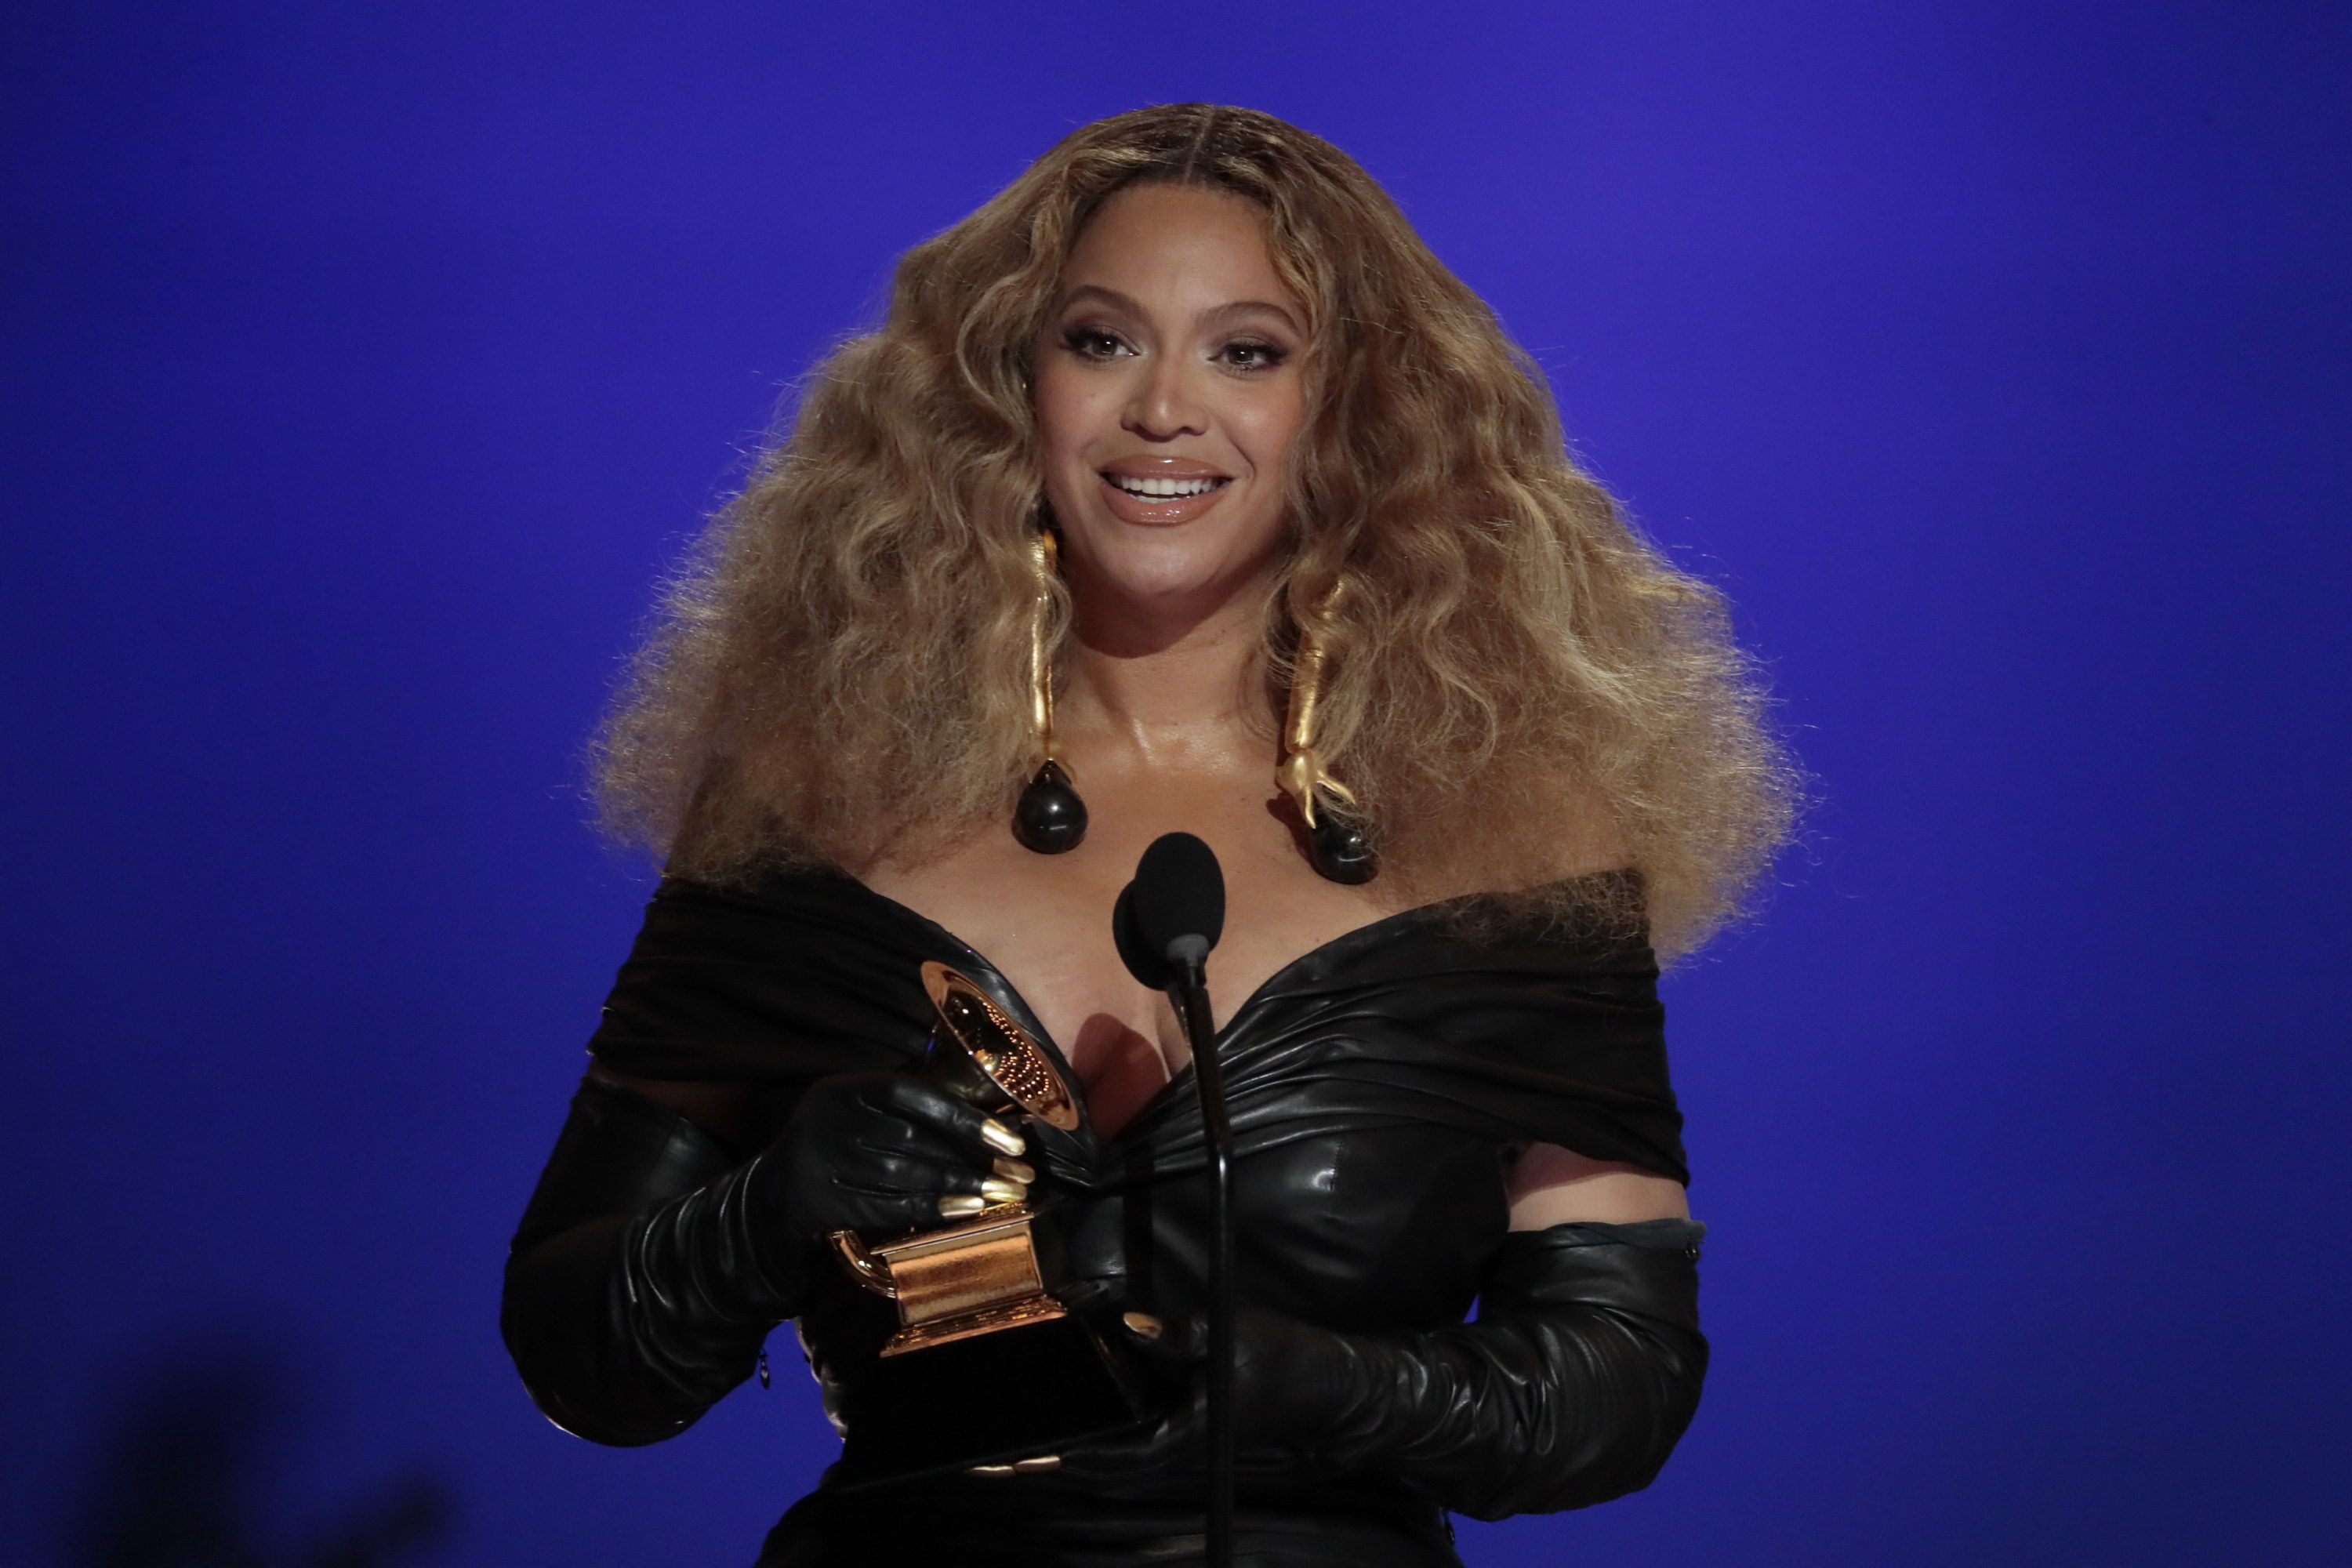 Beyonce wears a black latex off the shoulder V-neck dress with long sleeves. She is smiling mid-speech as she accepts an award. Her dark blonde hair is full and wavy, falling to her shoulders.